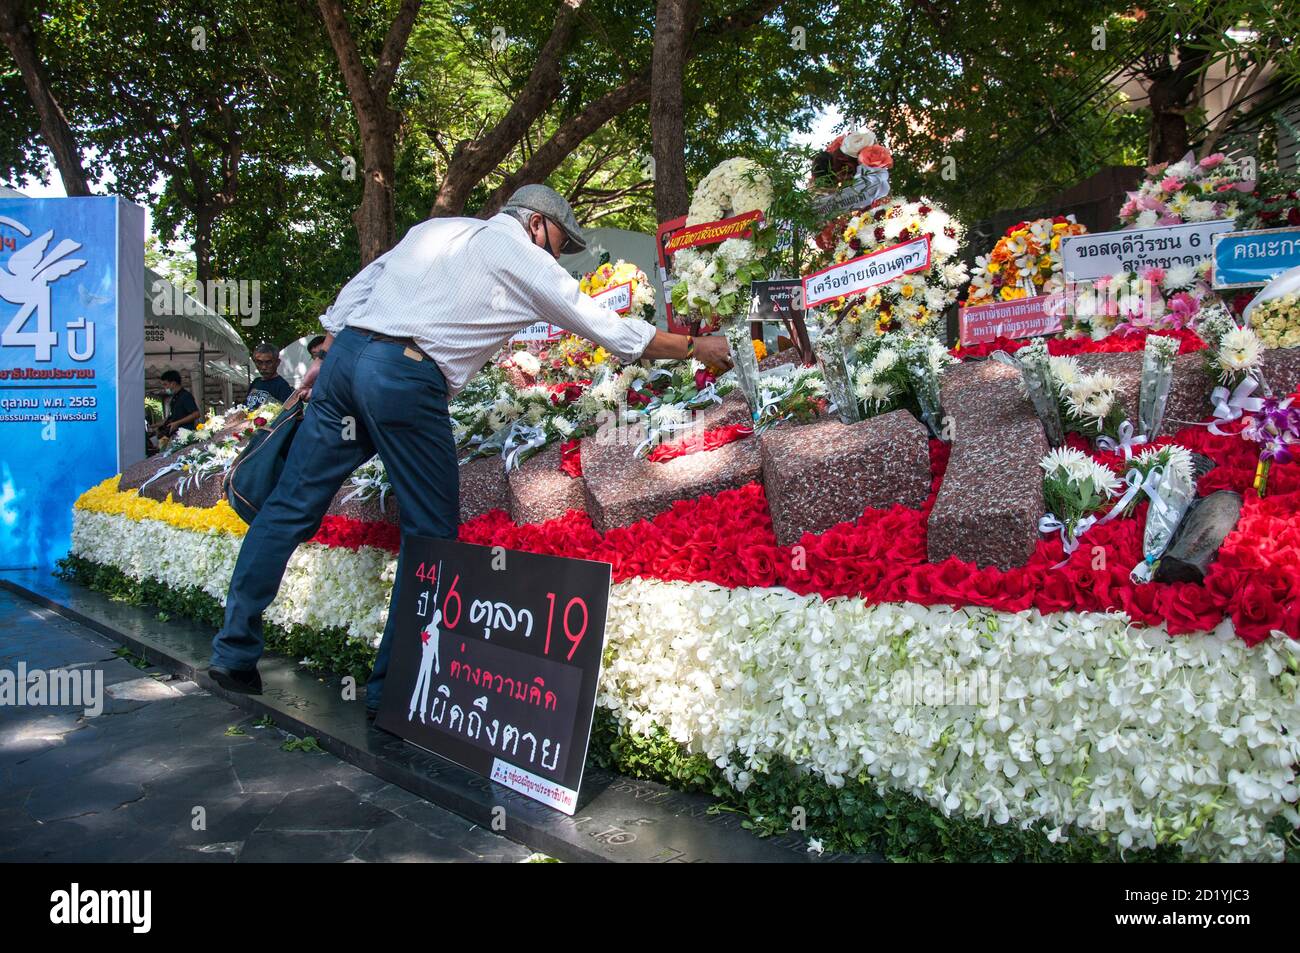 A man lays flowers in the memorial for the victims of the Thammasat University Massacre.The 6 October 1976 Thammasat University massacre was a violent crackdown by Thai police joined with right-wing paramilitaries against leftist protesters and students who had occupied Bangkok's Thammasat University. Stock Photo